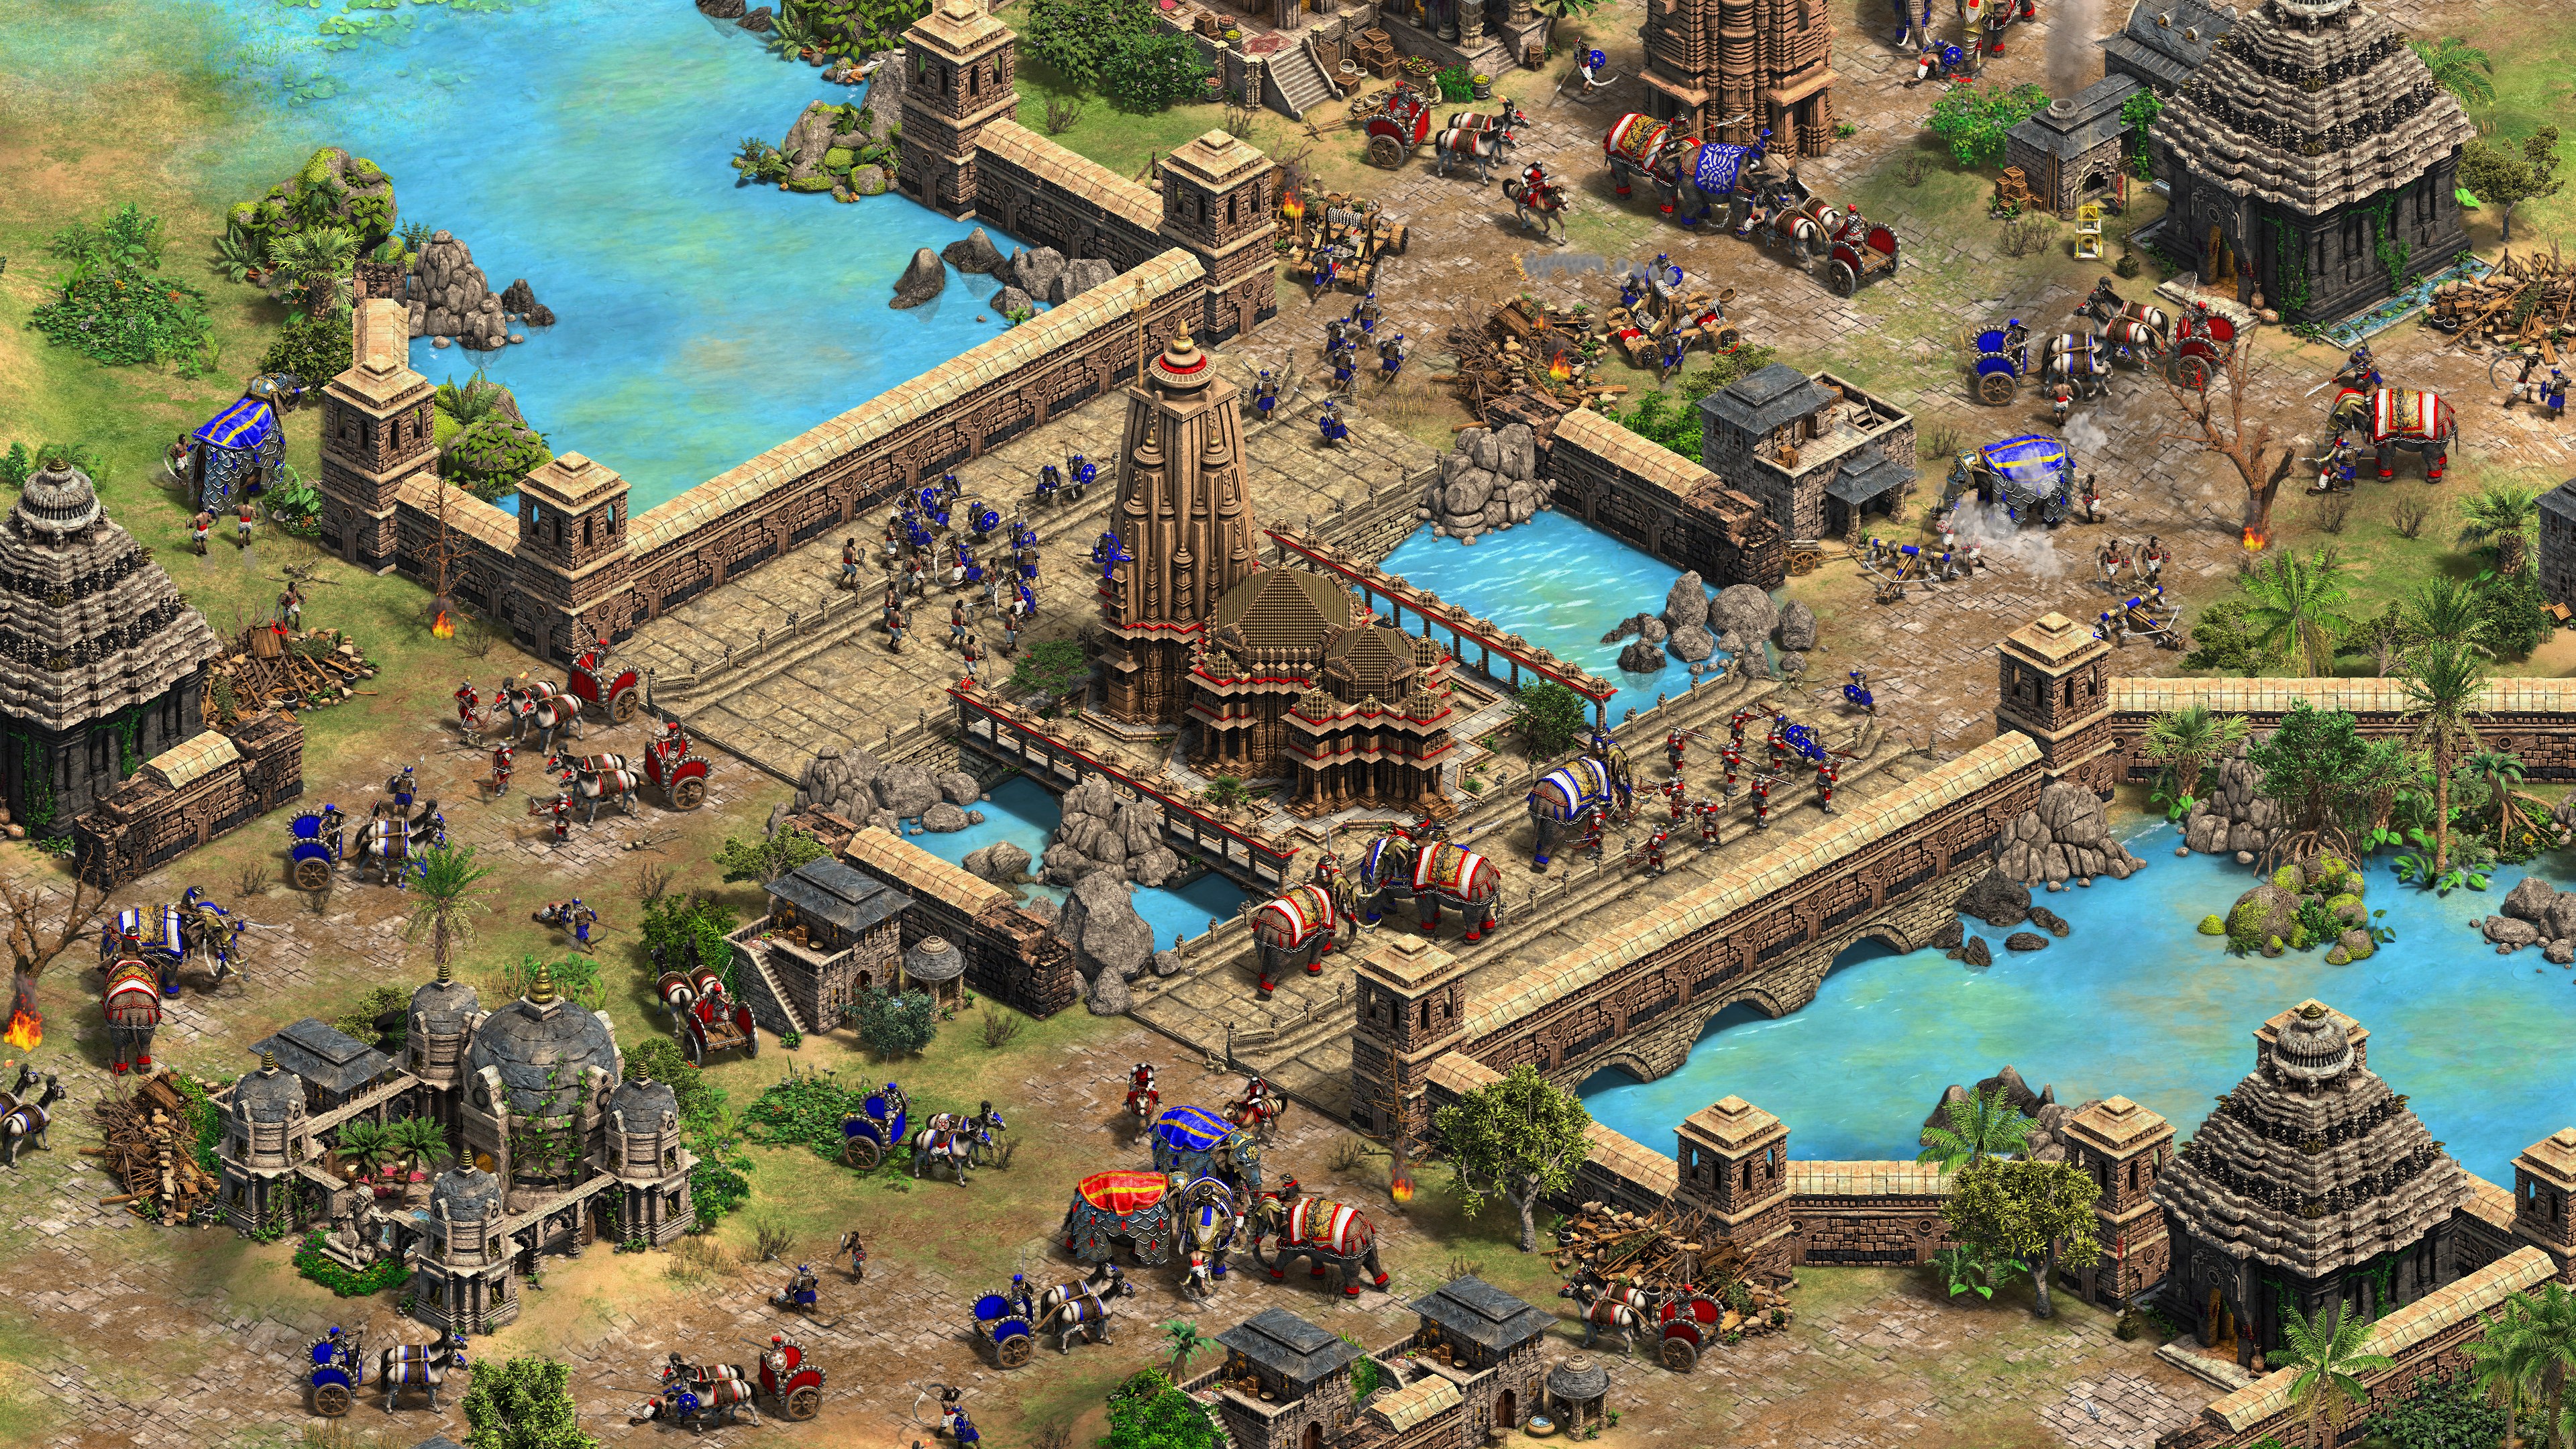 Age of Empires II: Definitive Edition - Dynasties of India screenshot 52479